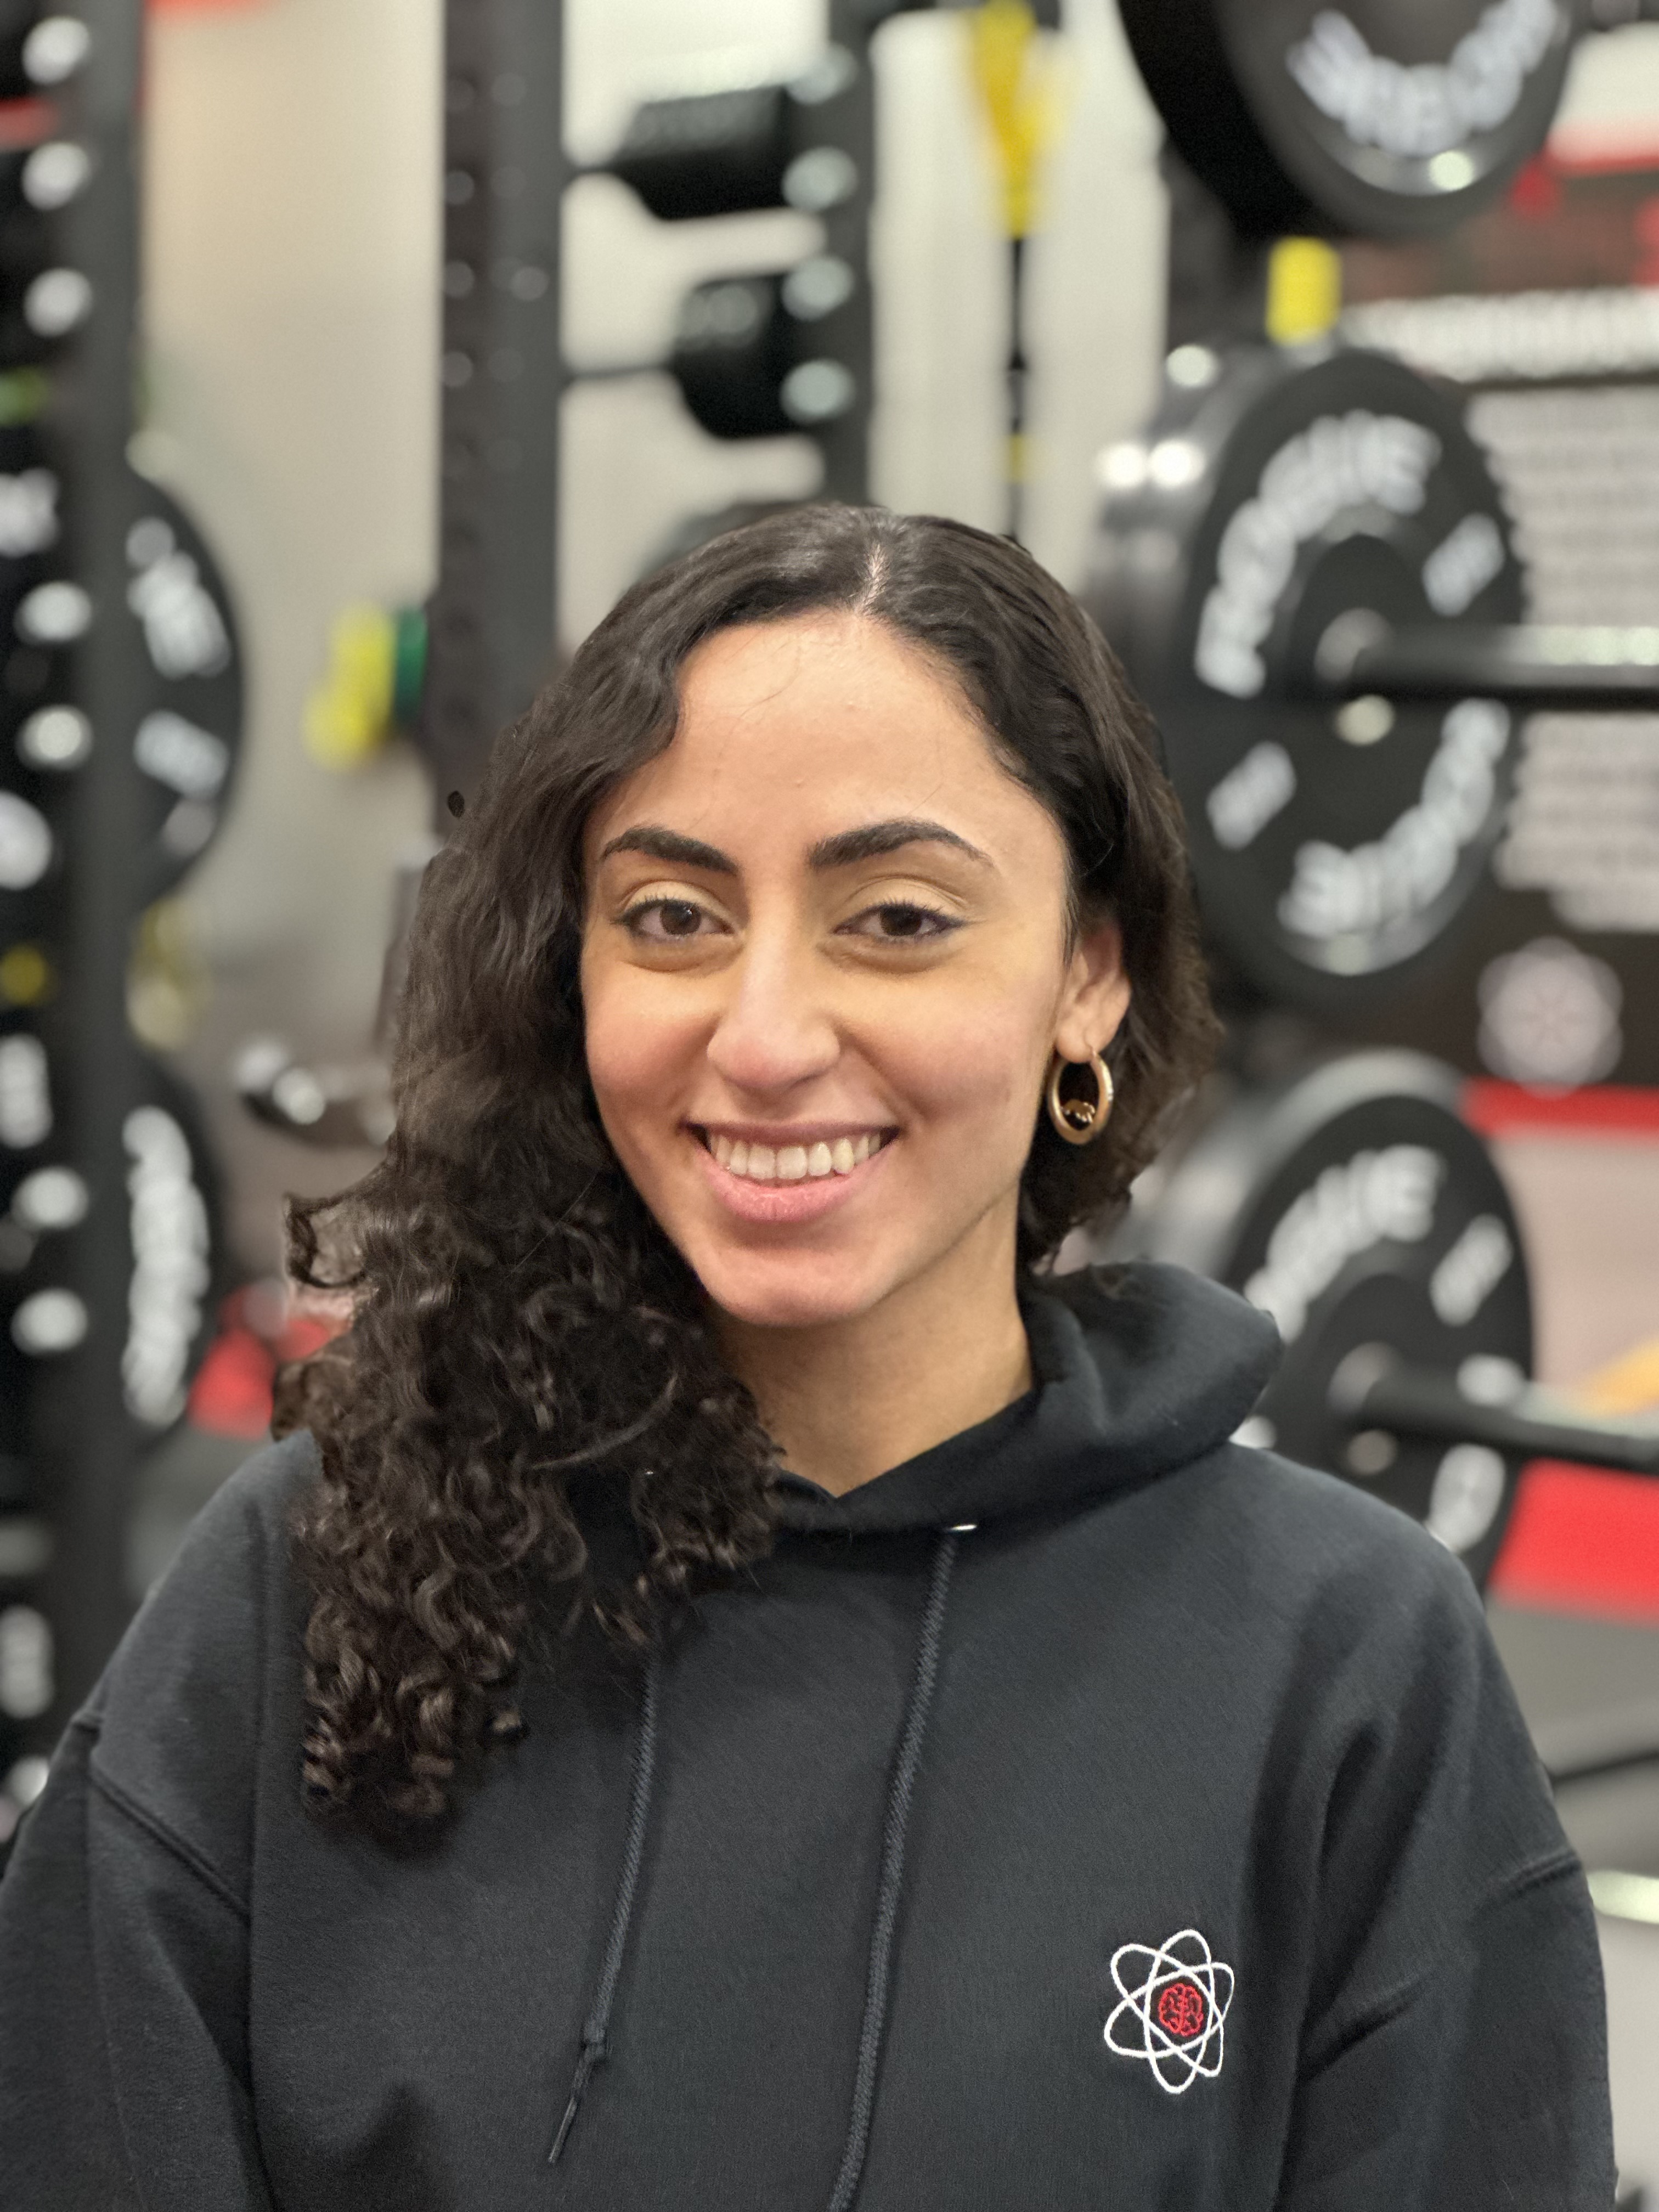 Diana Anela Cherkashin, kinesiologist and personal trainer at Studio Fit U, passionate about human performance and health, Montreal.